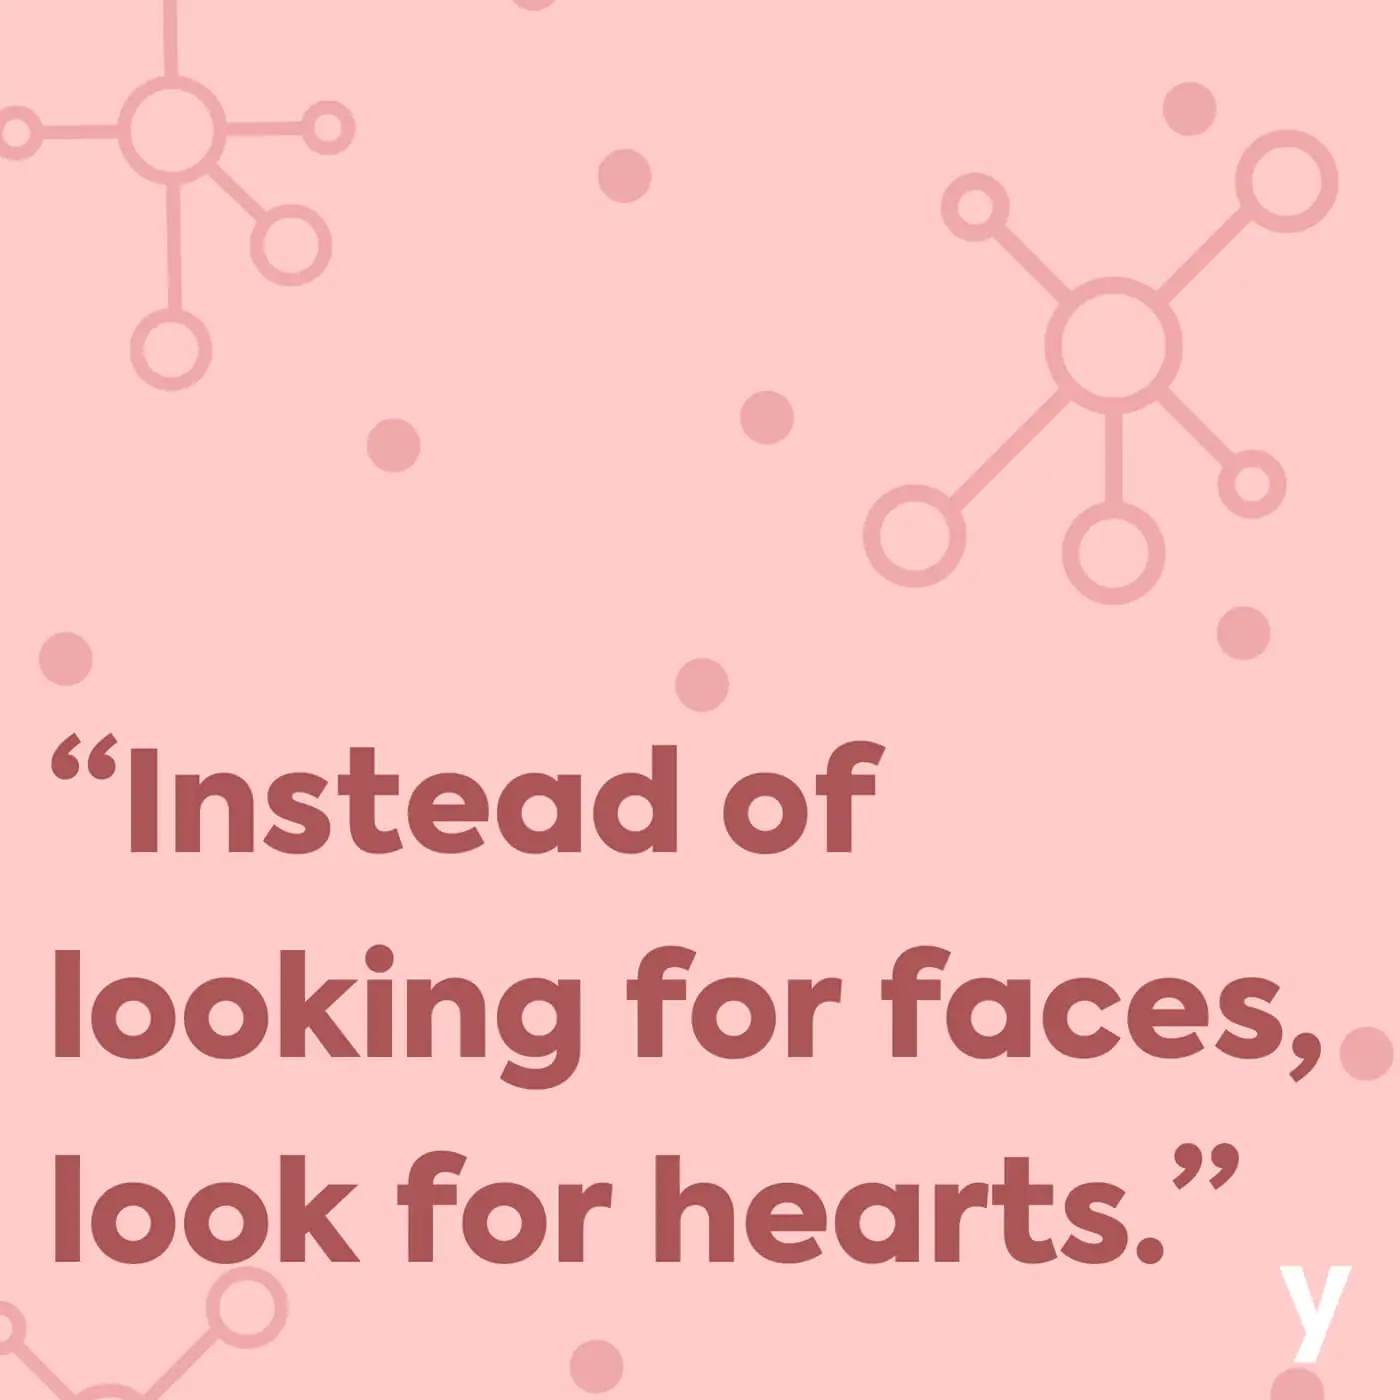 Instead of looking for faces, look for hearts.